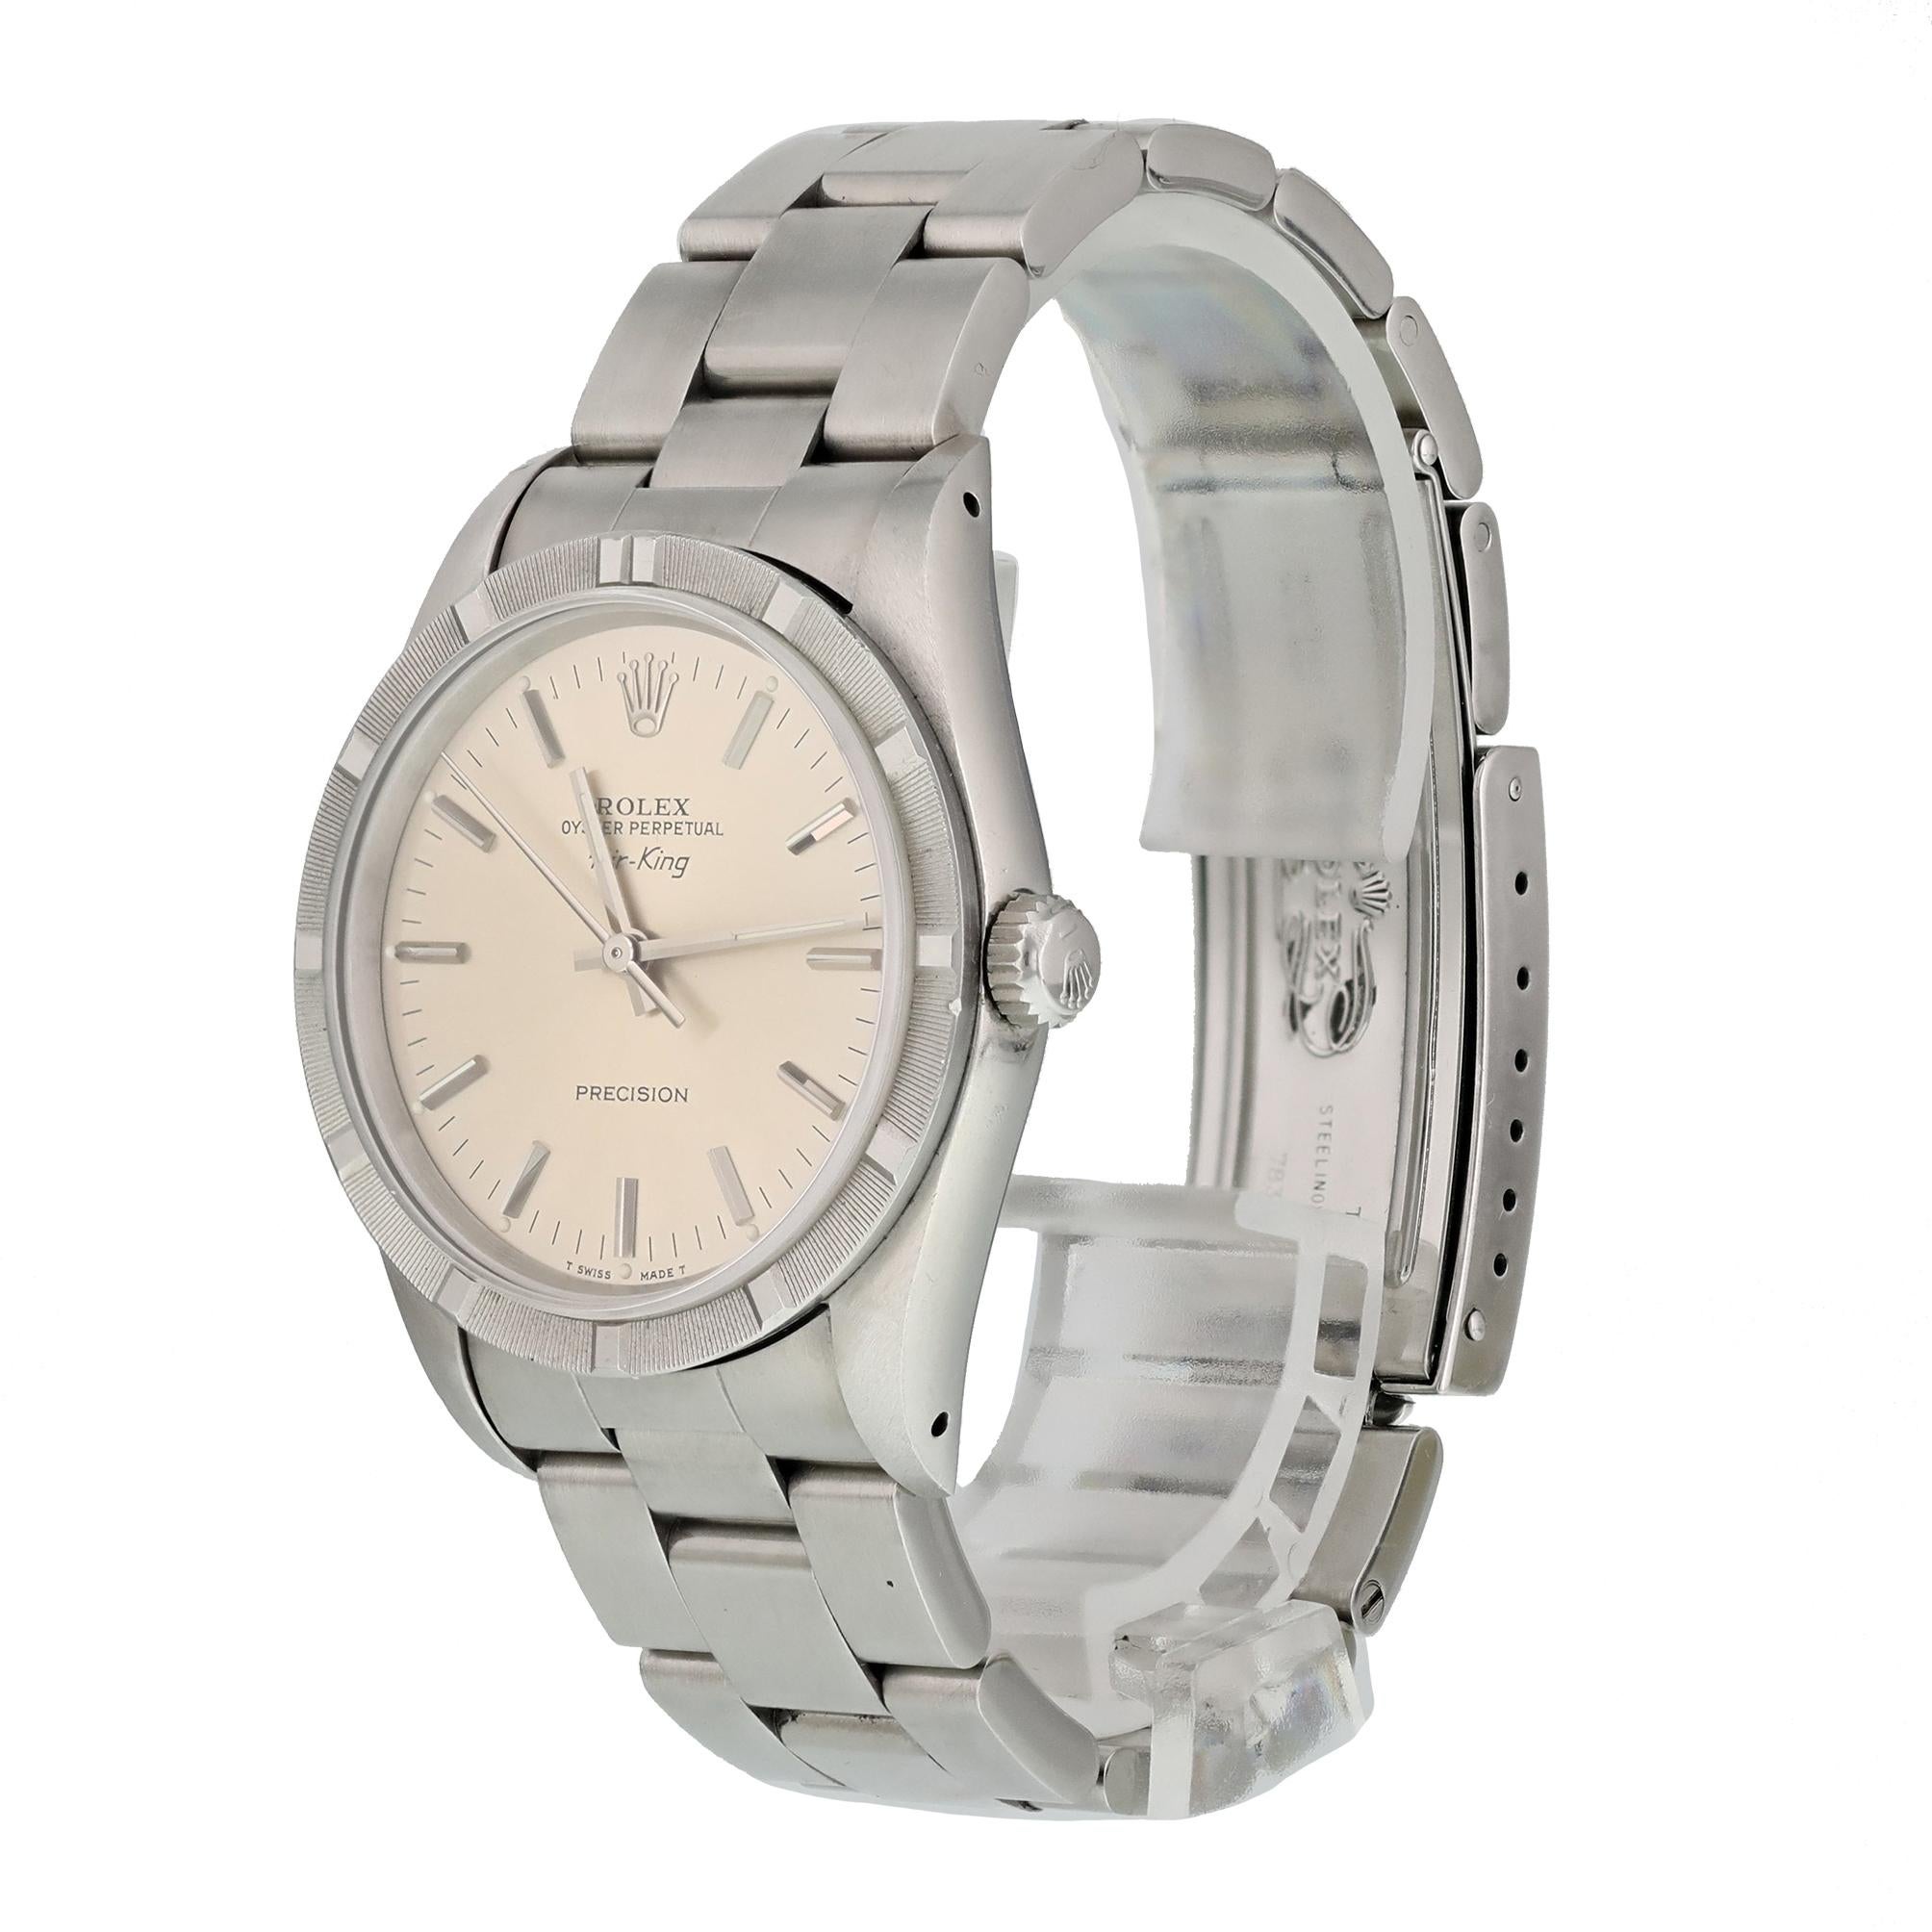 Rolex Air-King Precision 14010 Men's Watch. 
34mm Stainless Steel case. 
Stainless Steel engine turn bezel. 
Silver dial with Luminous Steel hands and index hour markers. 
Minute markers on the outer dial. 
Stainless Steel Bracelet with Fold Over